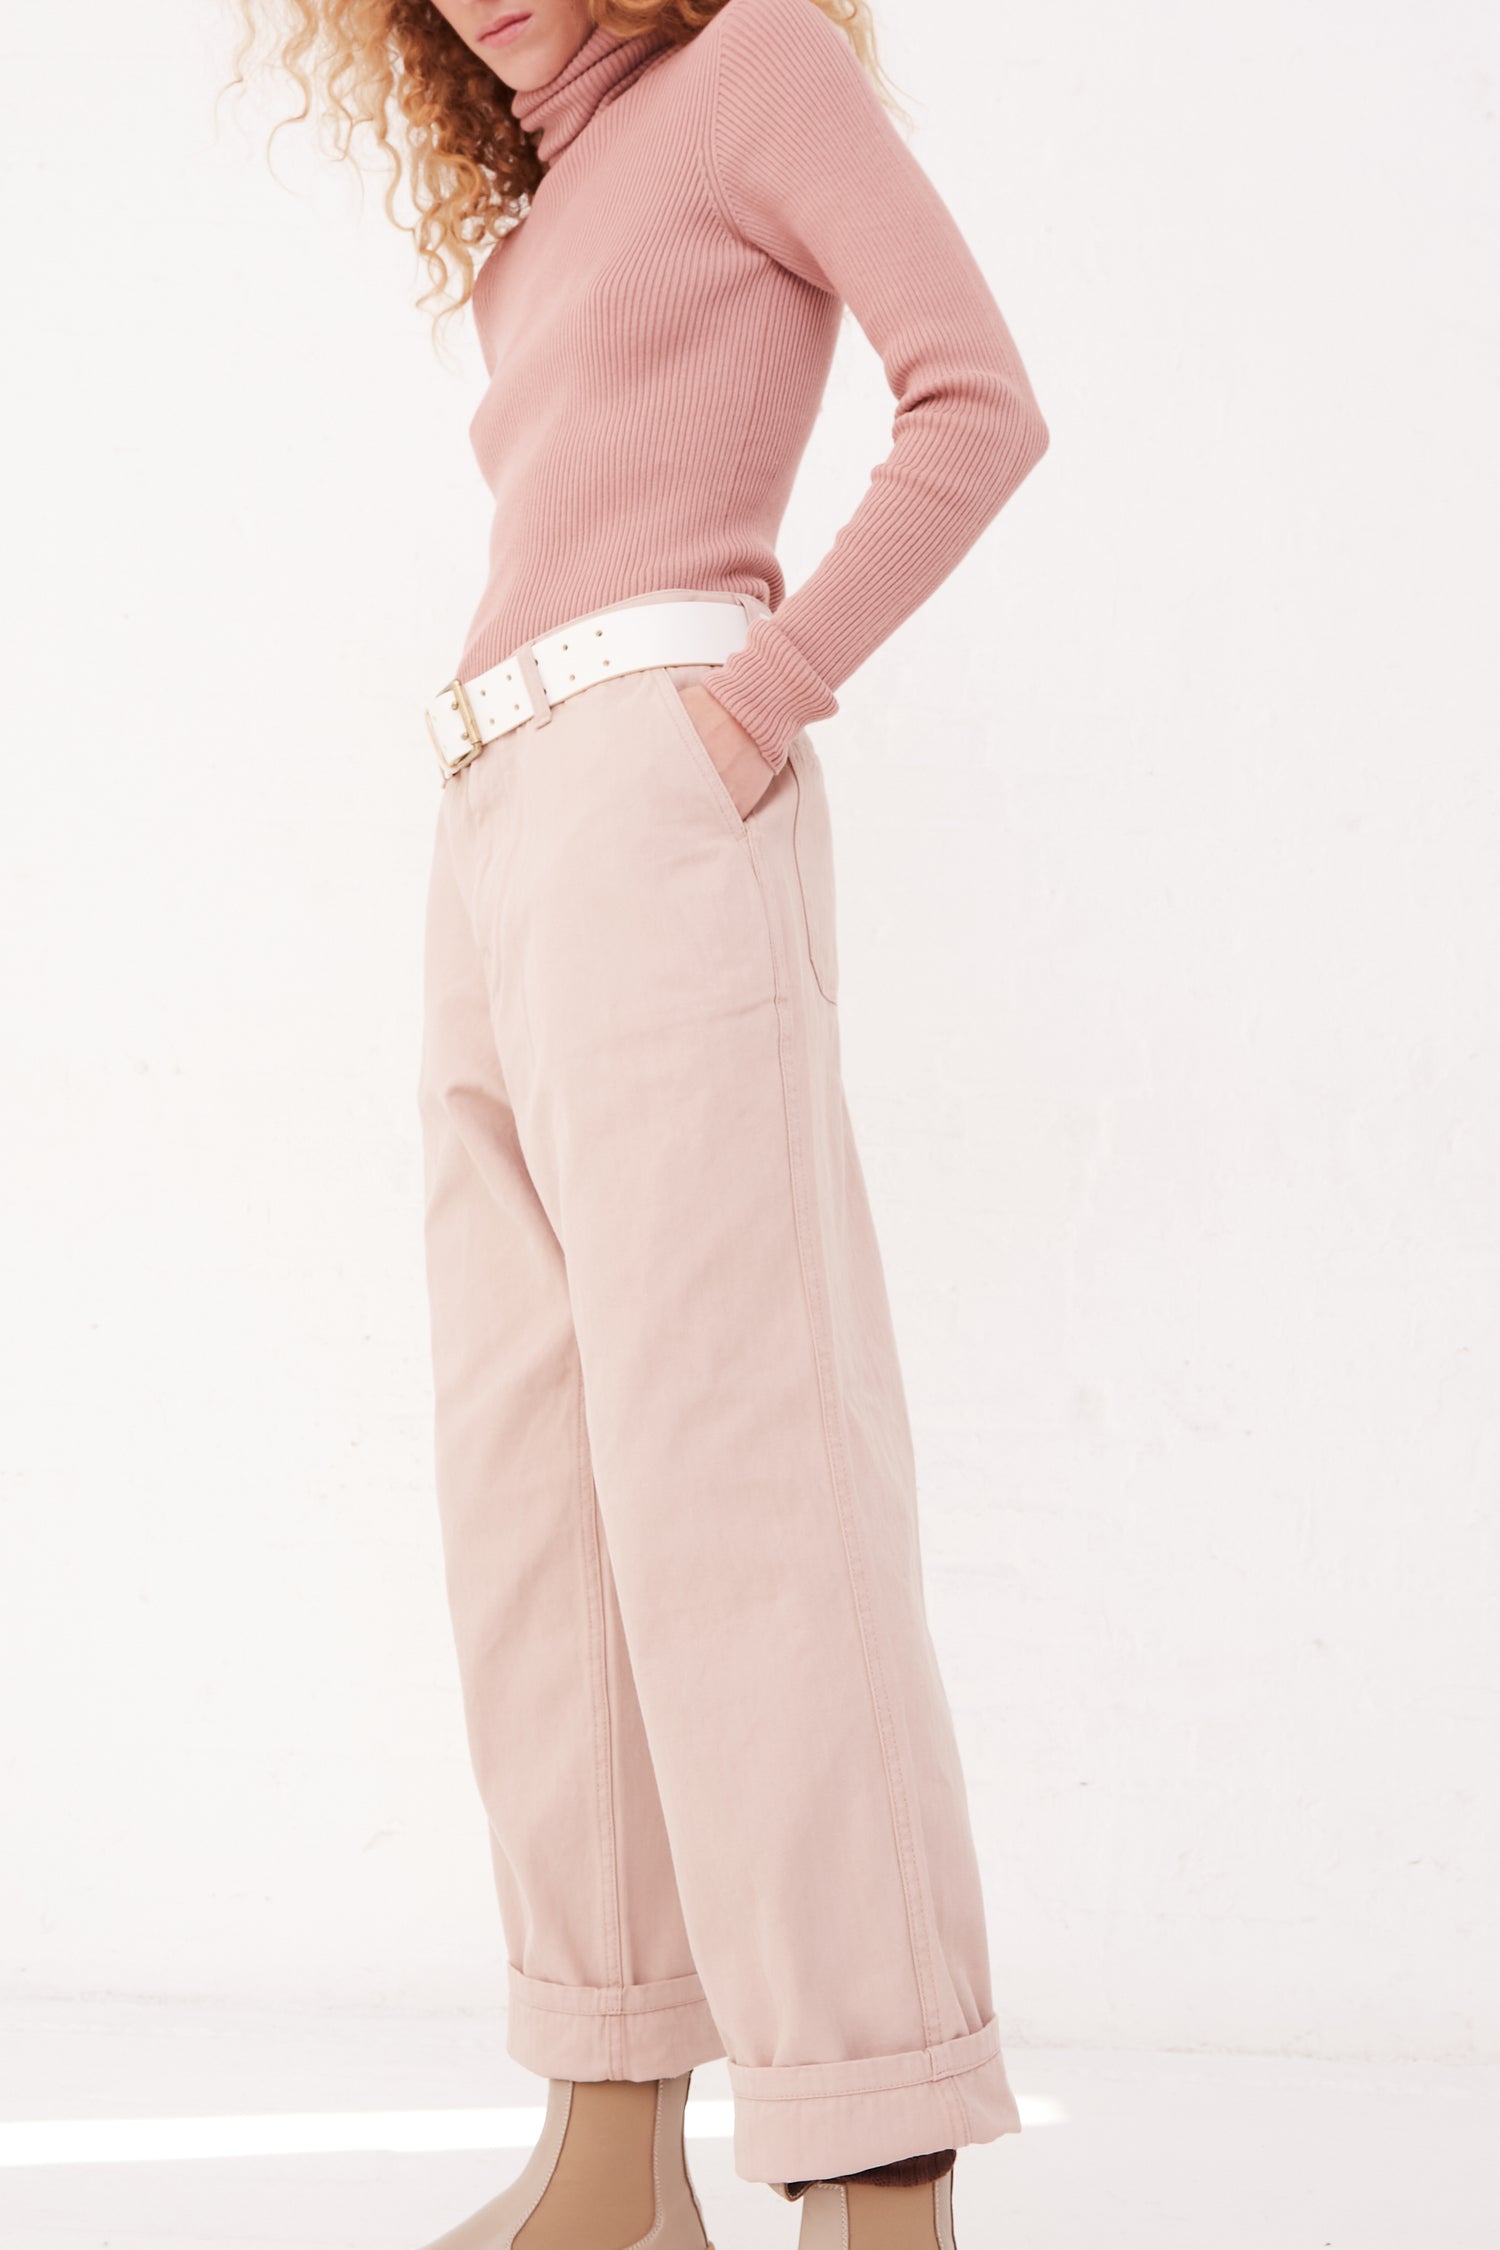 A model wearing Ichi Antiquités' Herringbone Pants in Pink and a relaxed fit pink long sleeve cotton shirt.